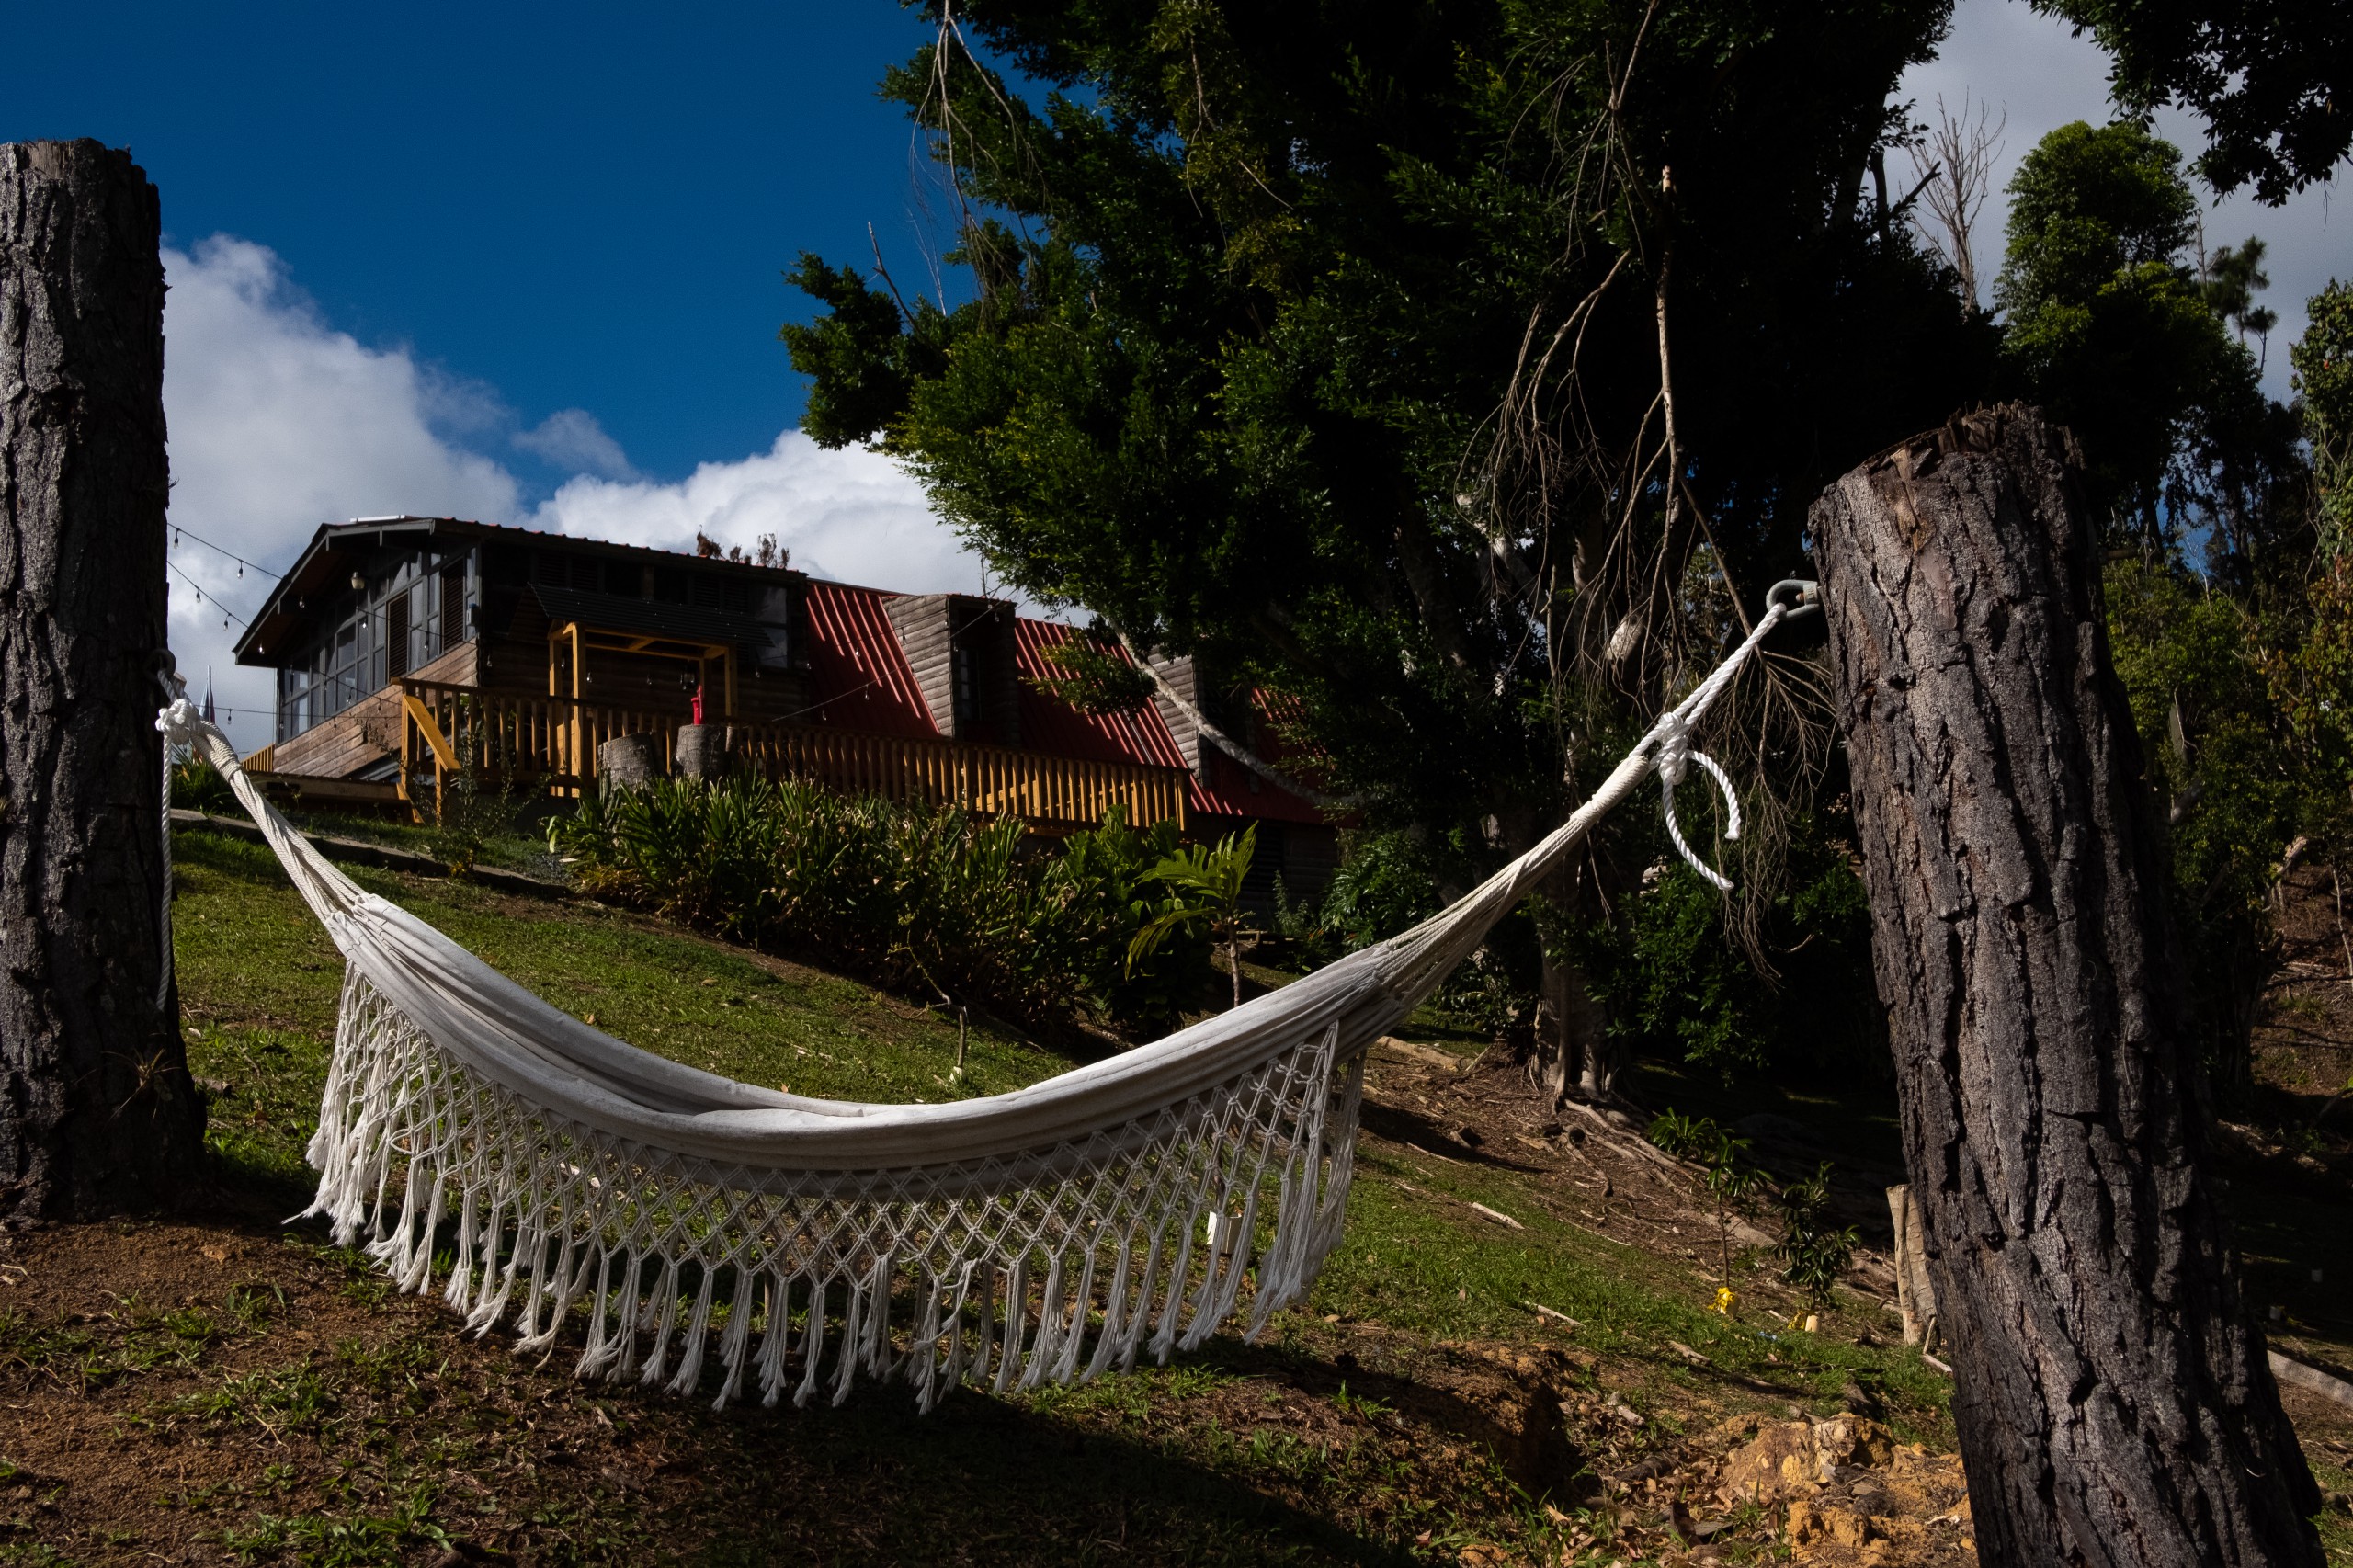 A house and a hammock strung between two stumps